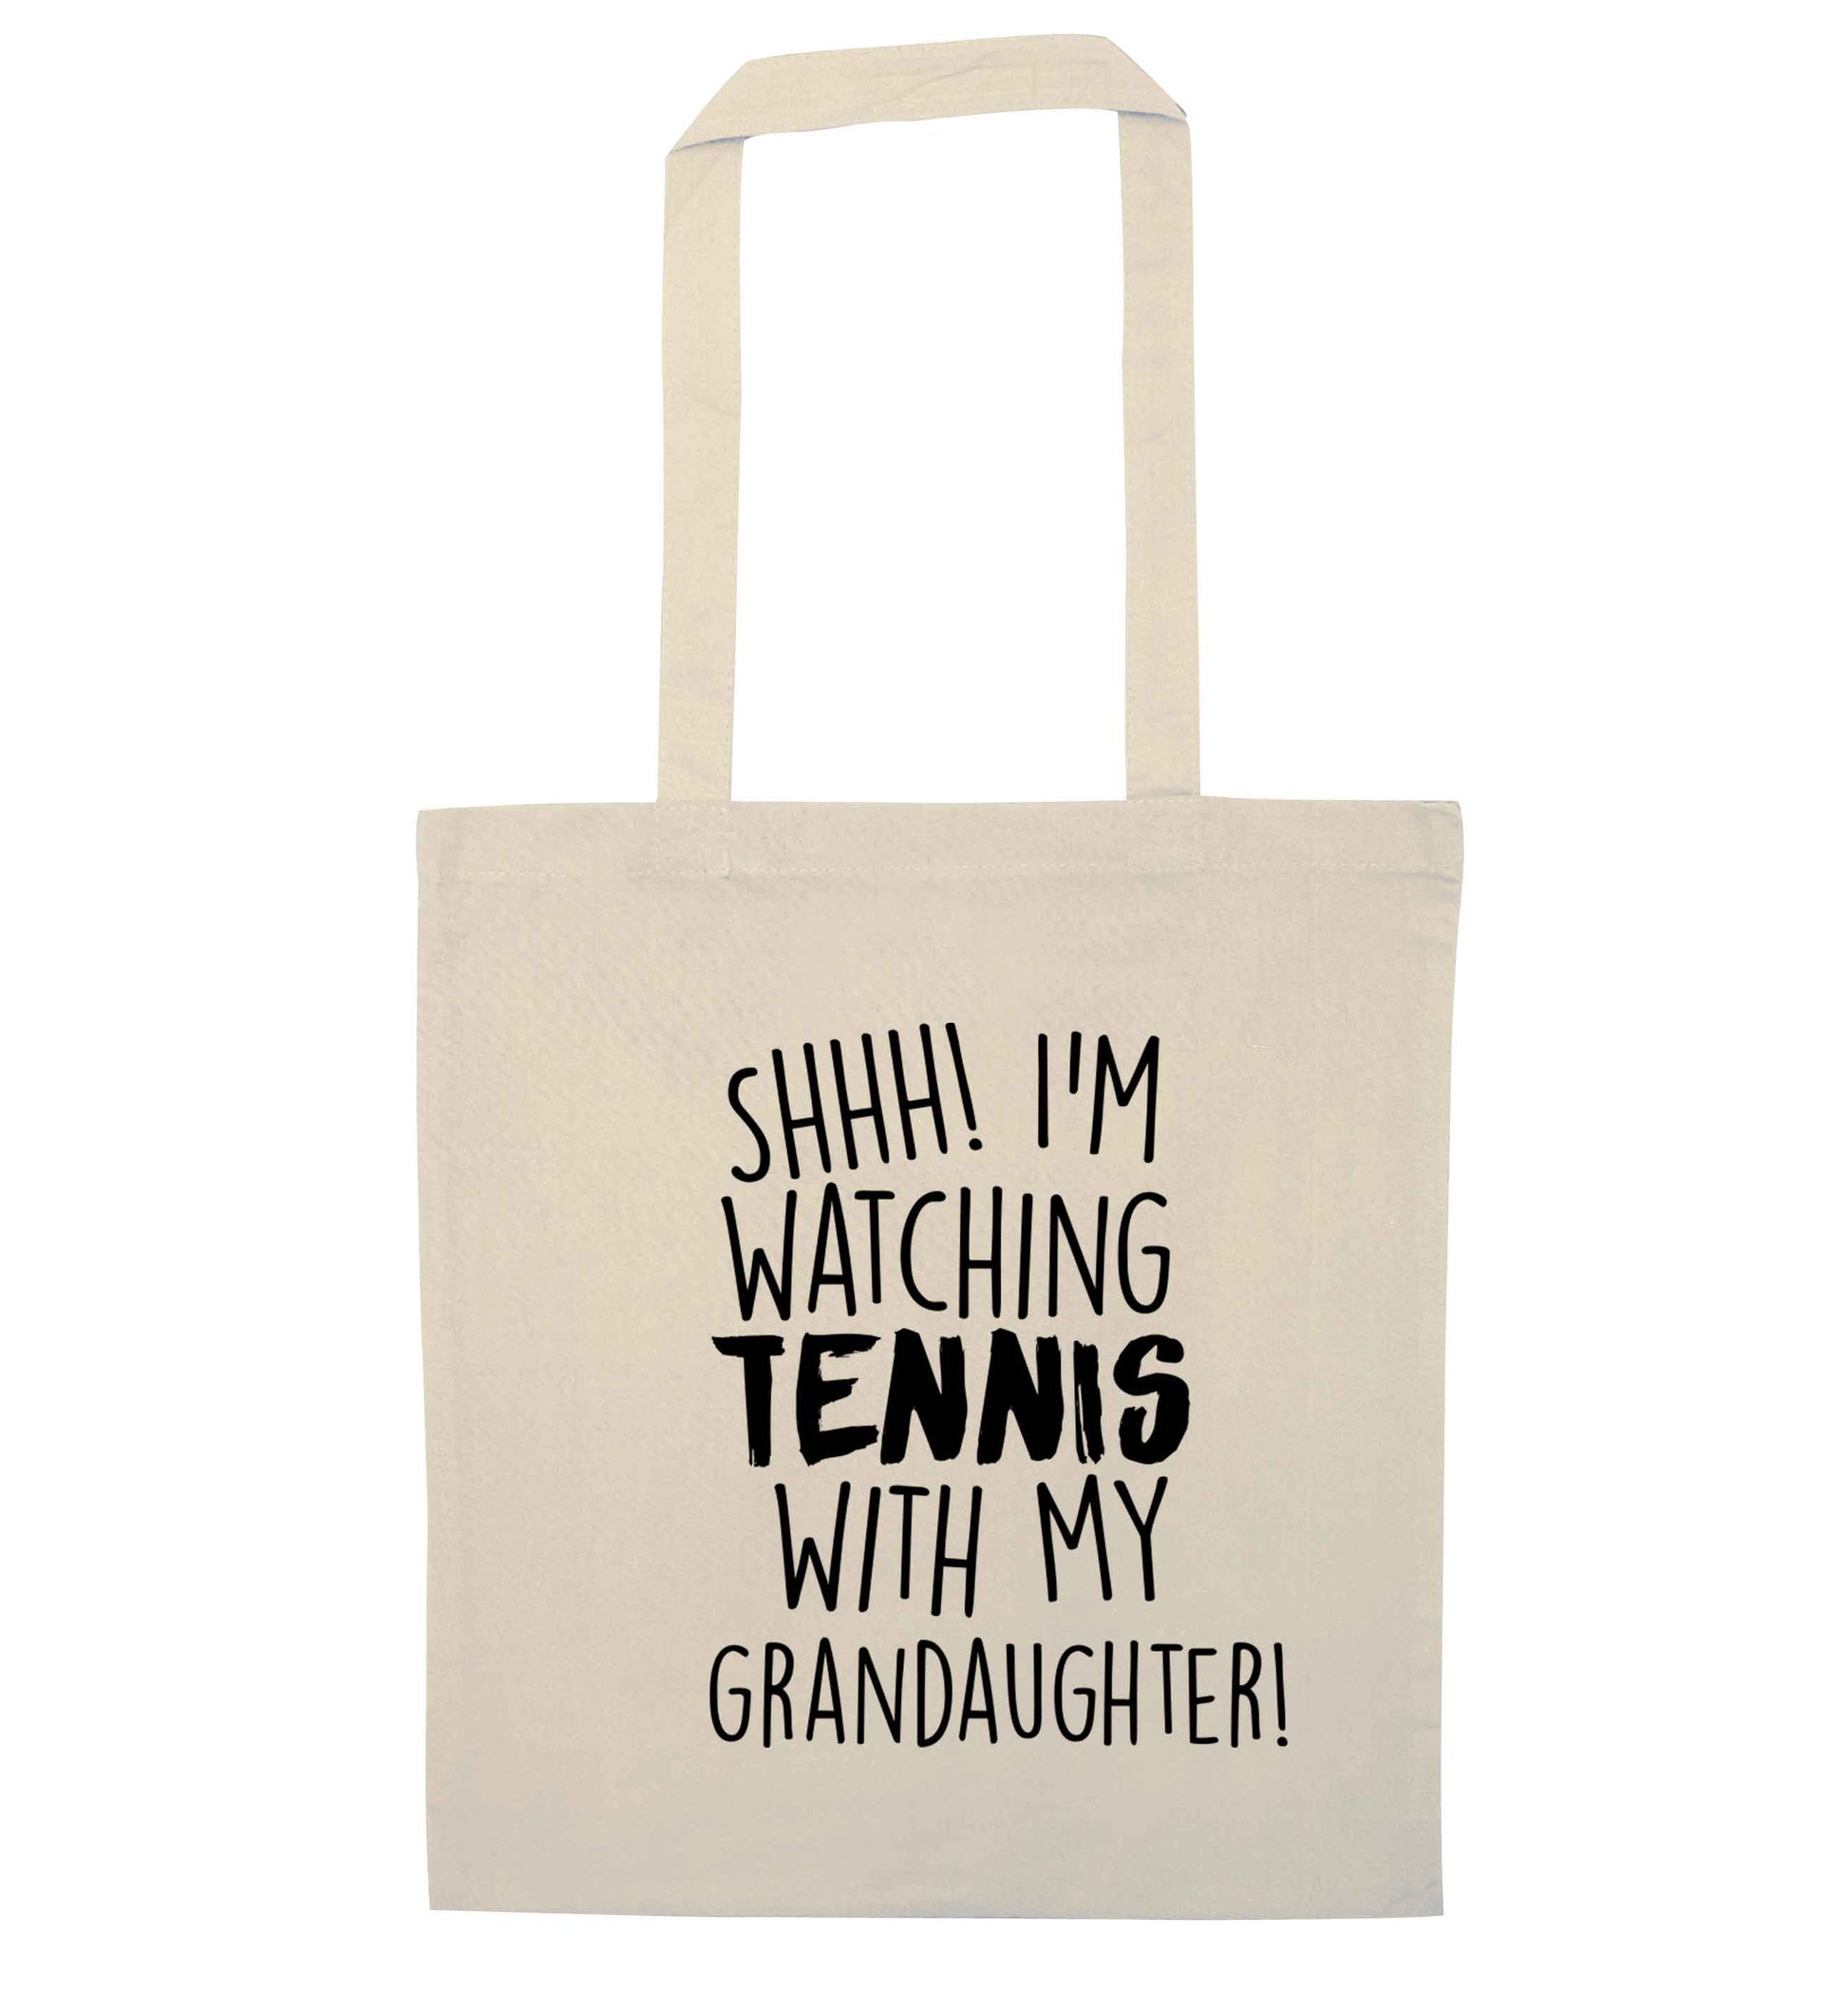 Shh! I'm watching tennis with my granddaughter! natural tote bag